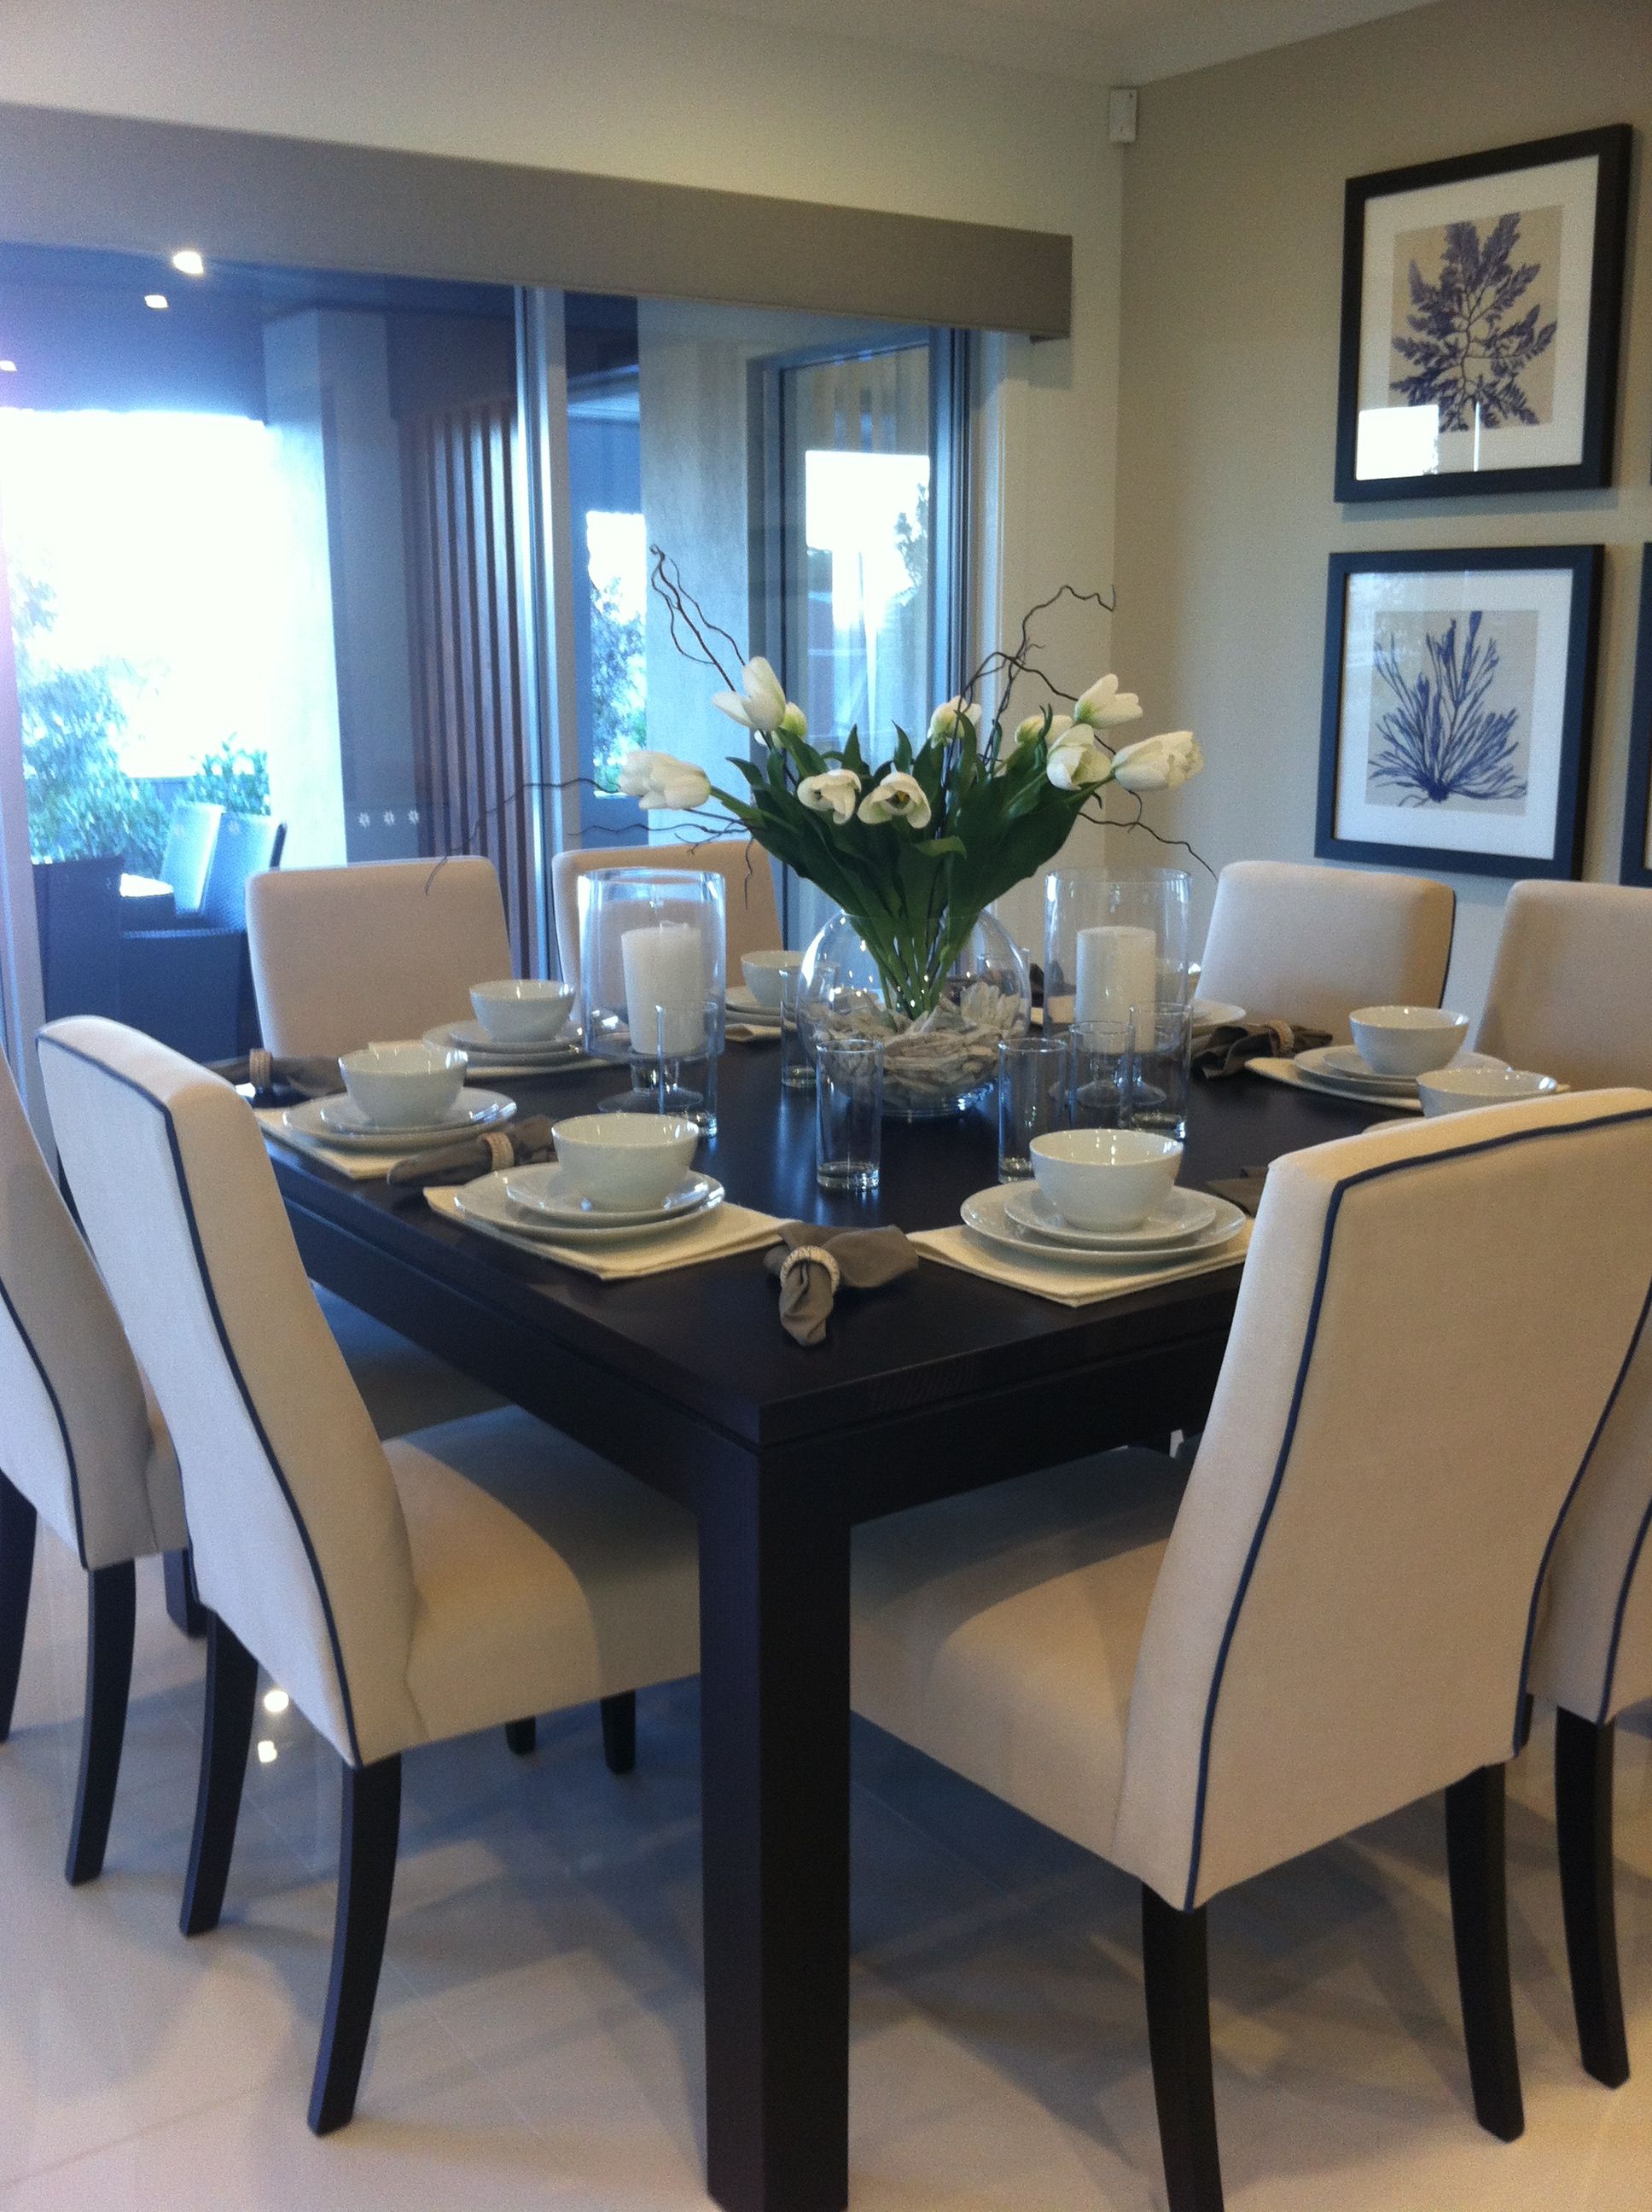 Beautifully staged dining table set with dining ware.